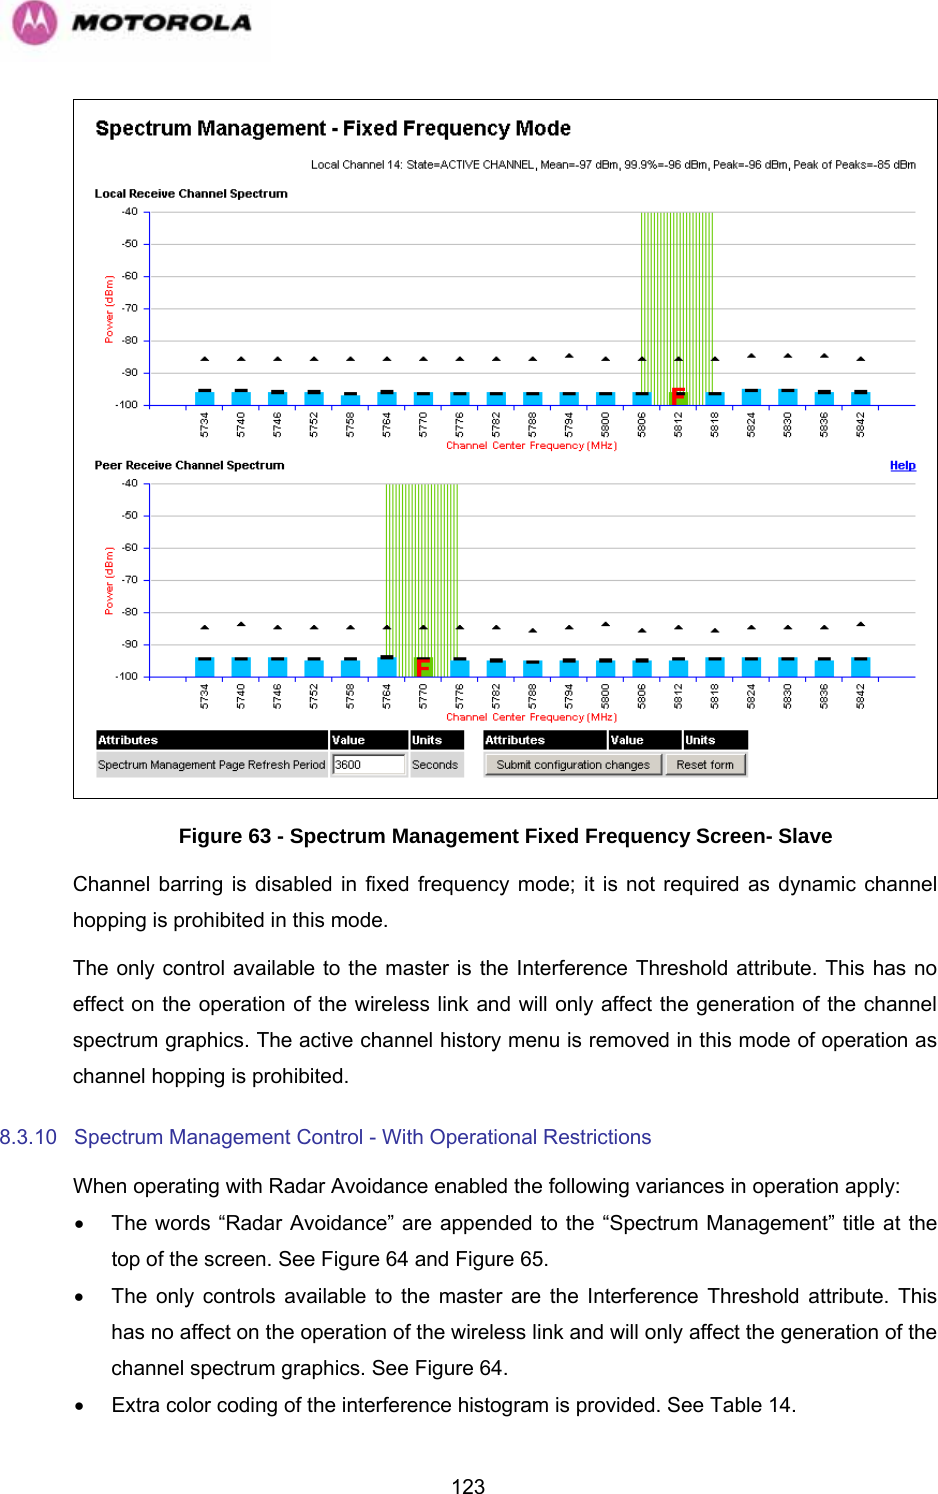   123 Figure 63 - Spectrum Management Fixed Frequency Screen- Slave Channel barring is disabled in fixed frequency mode; it is not required as dynamic channel hopping is prohibited in this mode. The only control available to the master is the Interference Threshold attribute. This has no effect on the operation of the wireless link and will only affect the generation of the channel spectrum graphics. The active channel history menu is removed in this mode of operation as channel hopping is prohibited. 8.3.10  Spectrum Management Control - With Operational Restrictions  When operating with Radar Avoidance enabled the following variances in operation apply: •  The words “Radar Avoidance” are appended to the “Spectrum Management” title at the top of the screen. See Figure 64 and Figure 65. •  The only controls available to the master are the Interference Threshold attribute. This has no affect on the operation of the wireless link and will only affect the generation of the channel spectrum graphics. See Figure 64. •  Extra color coding of the interference histogram is provided. See Table 14. 